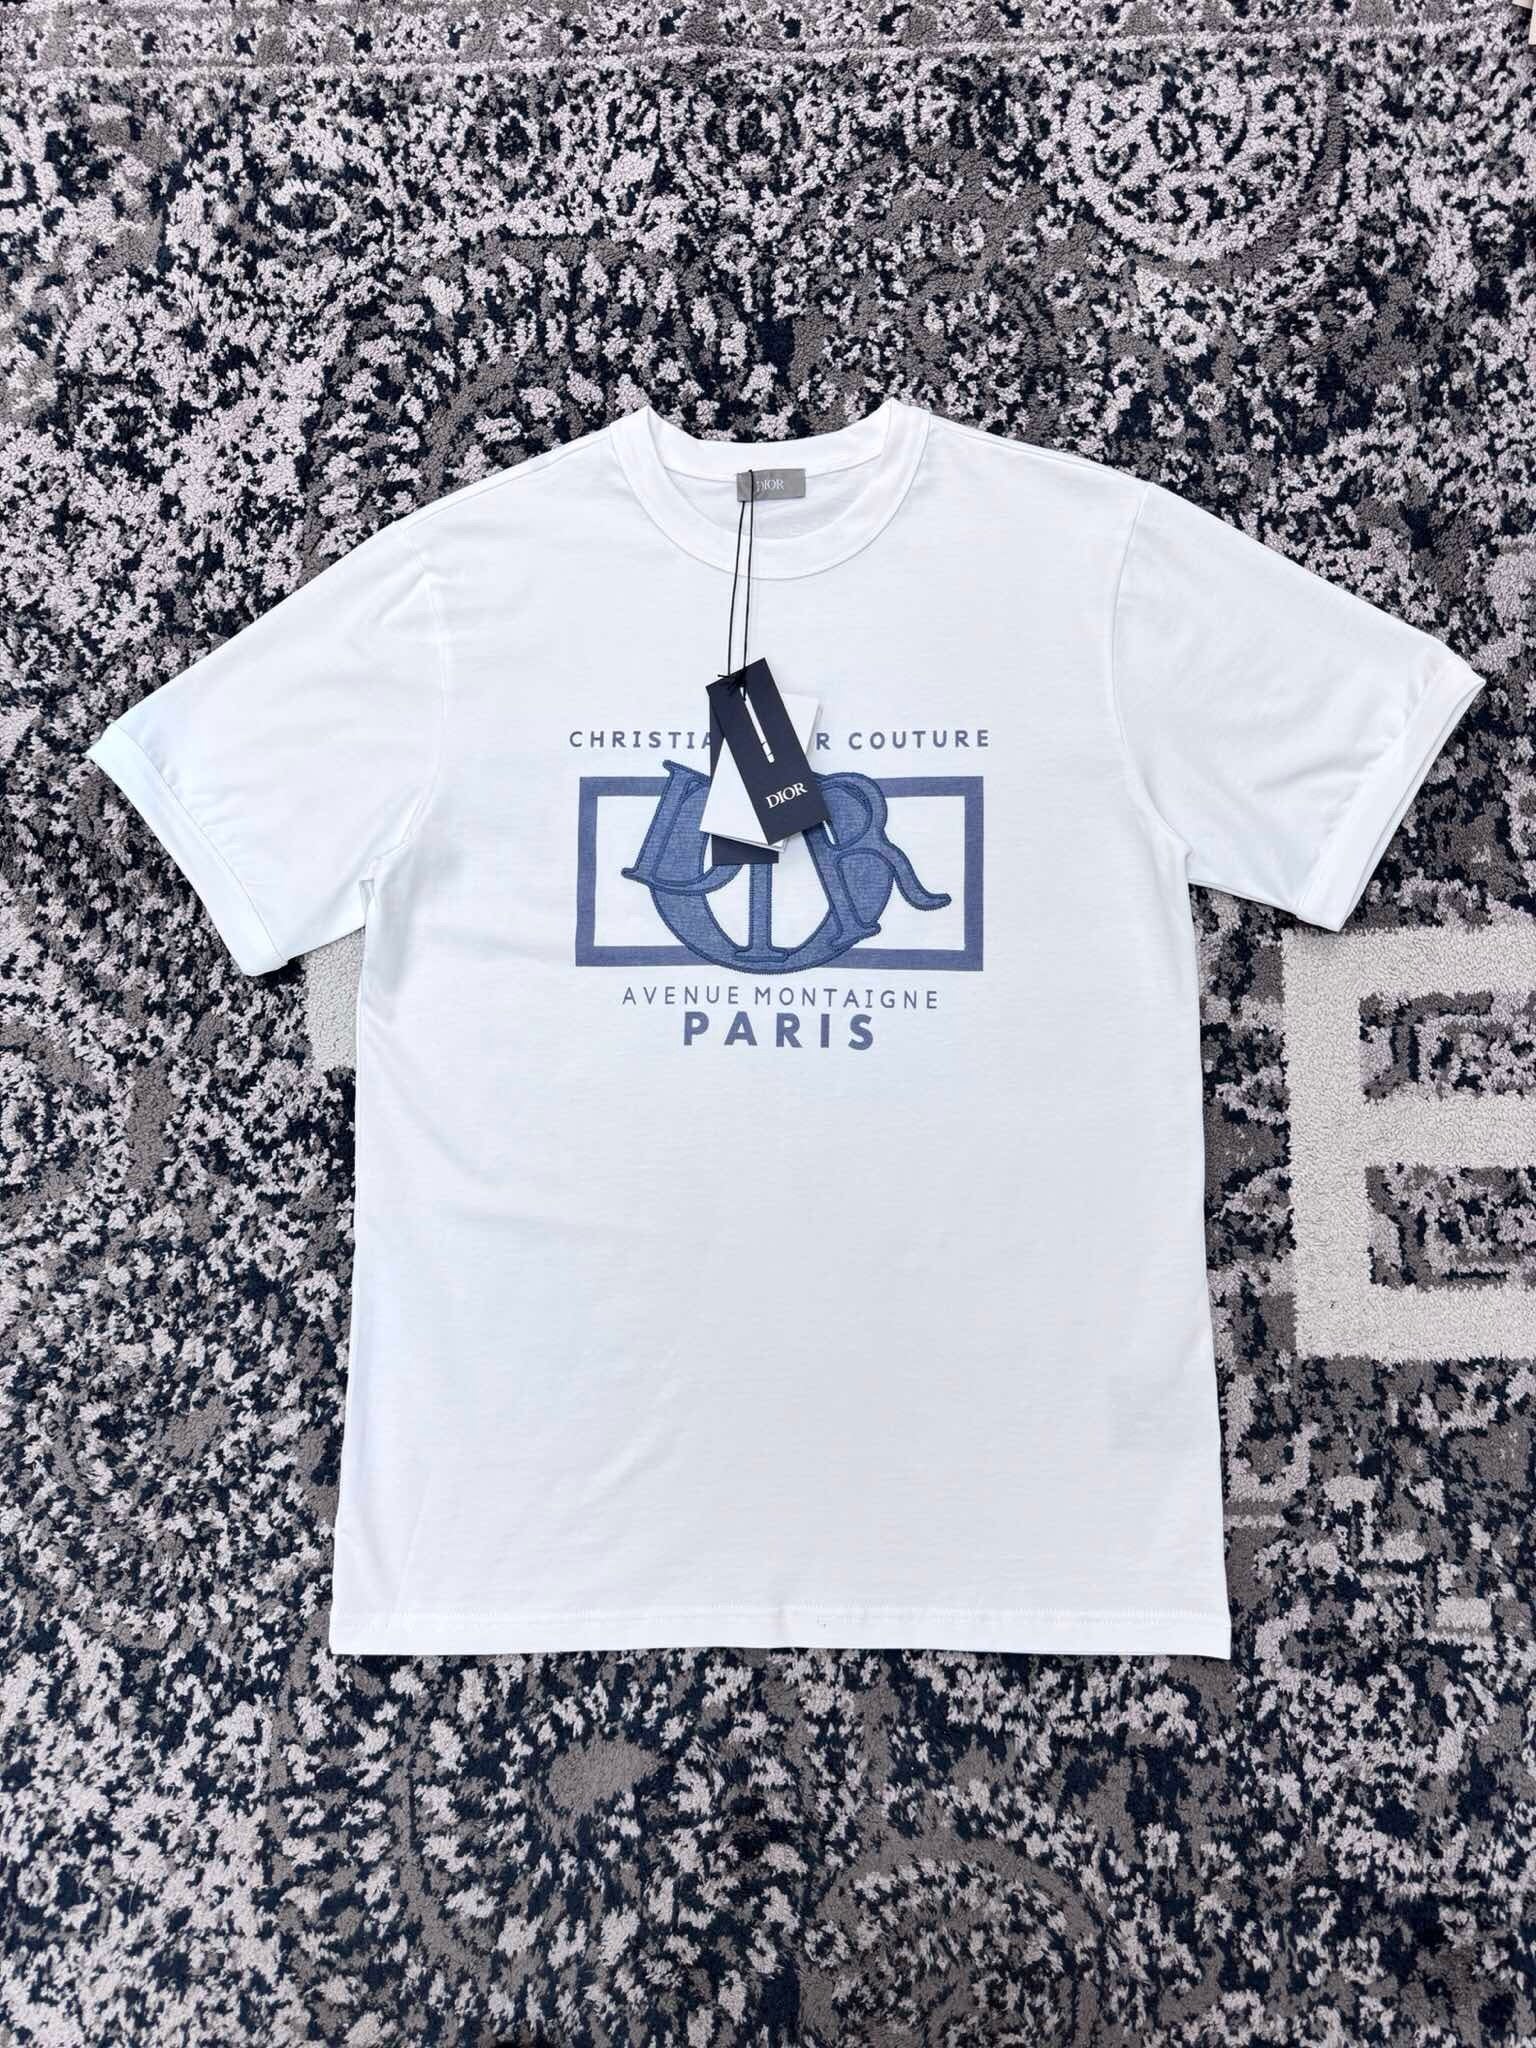 White and Sky blue T-shirt